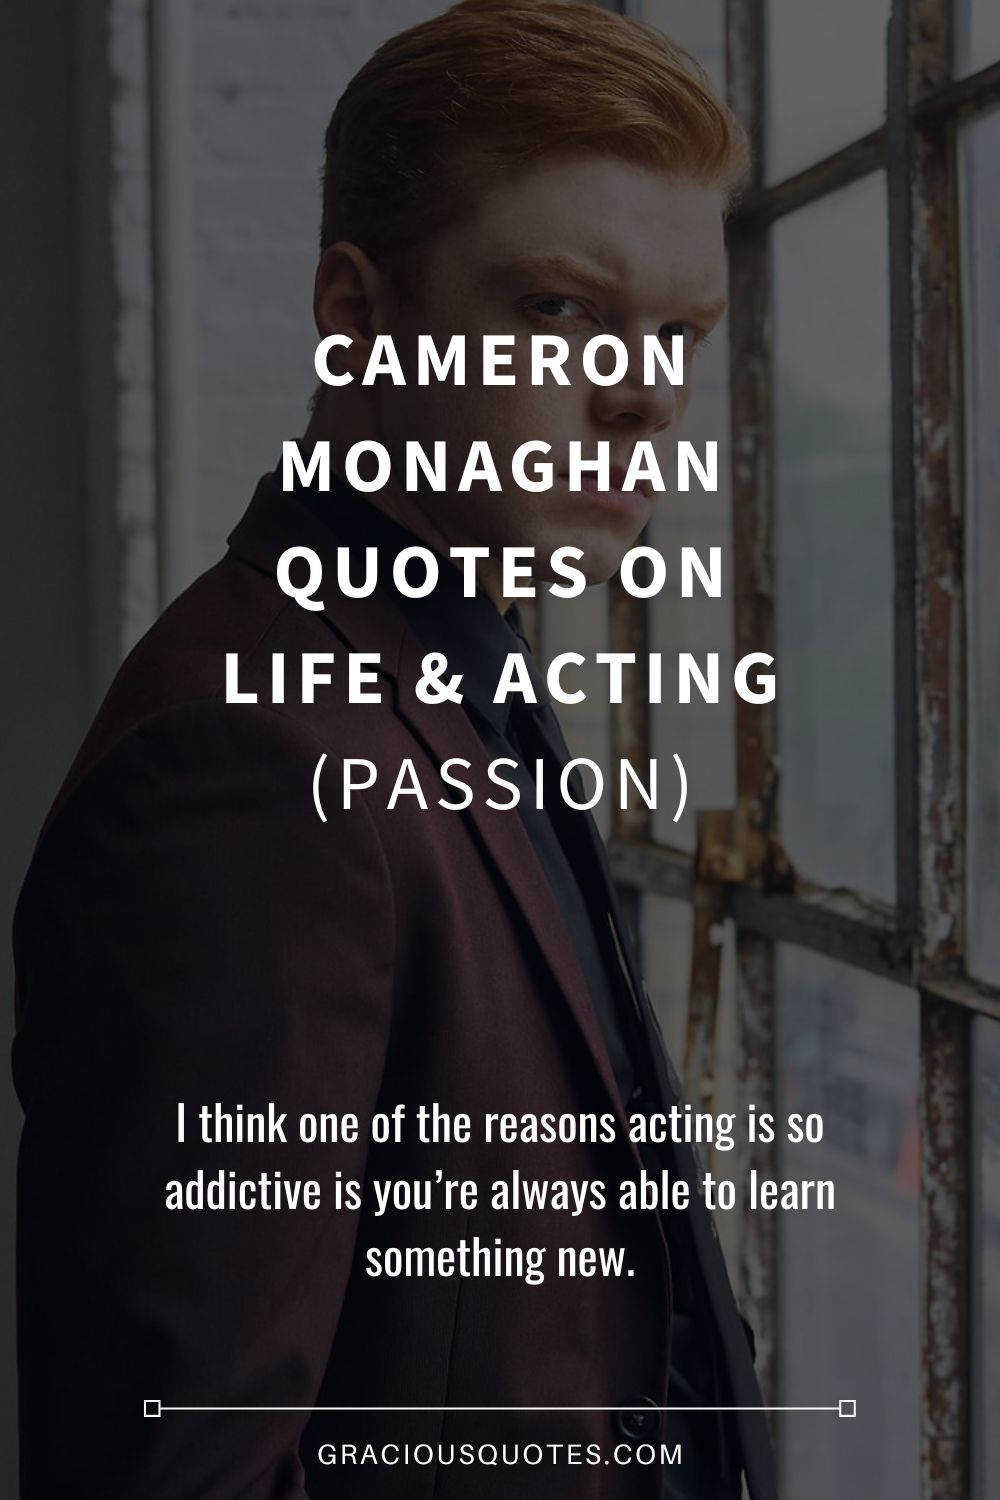 Cameron Monaghan Quotes on Life & Acting (PASSION) - Gracious Quotes